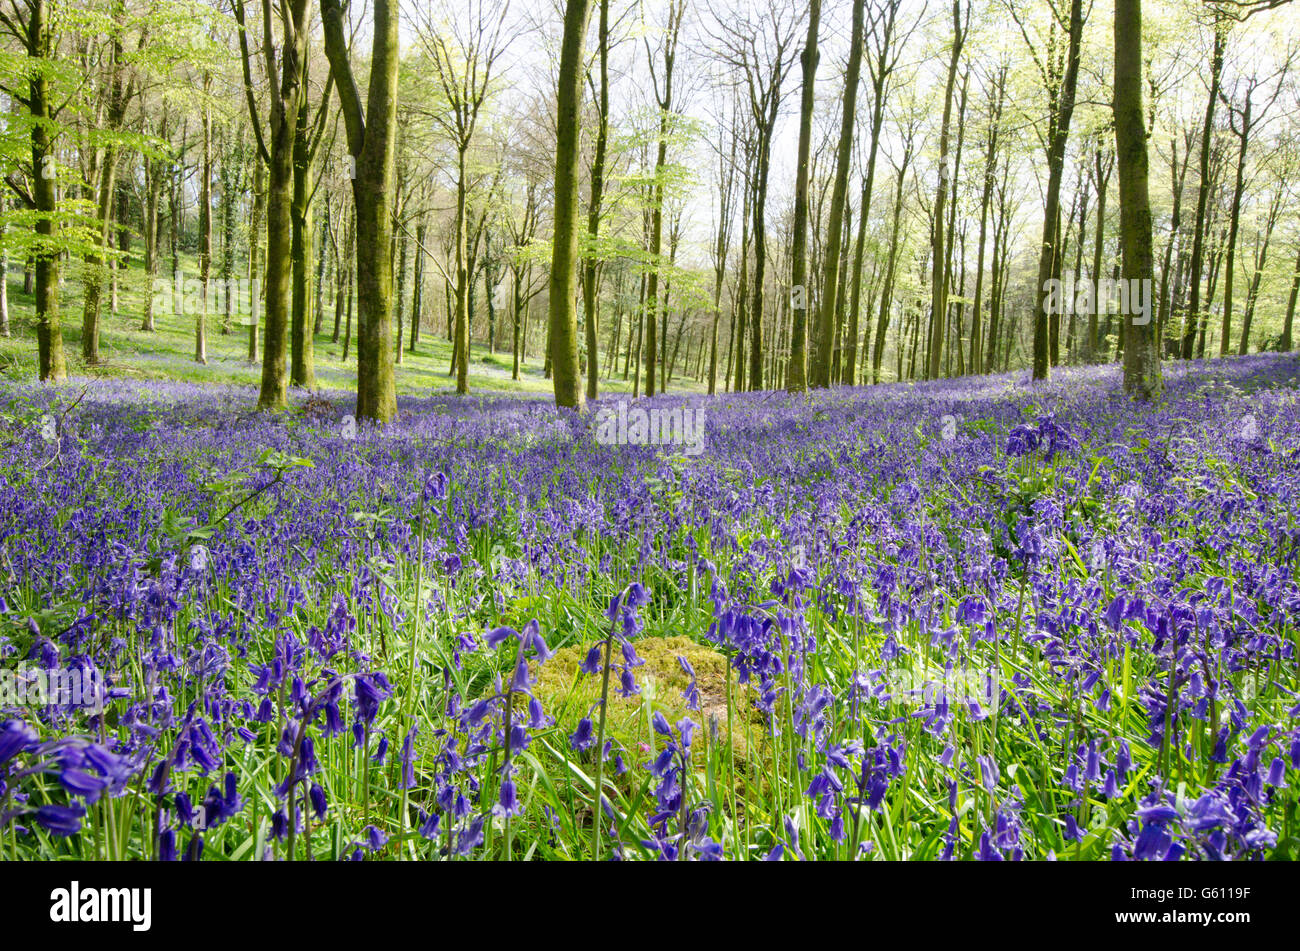 Bluebells [Hyacinthoides non-scripta] growing as a carpet under the canopy of common beech trees. West Sussex, UK. May. Stock Photo